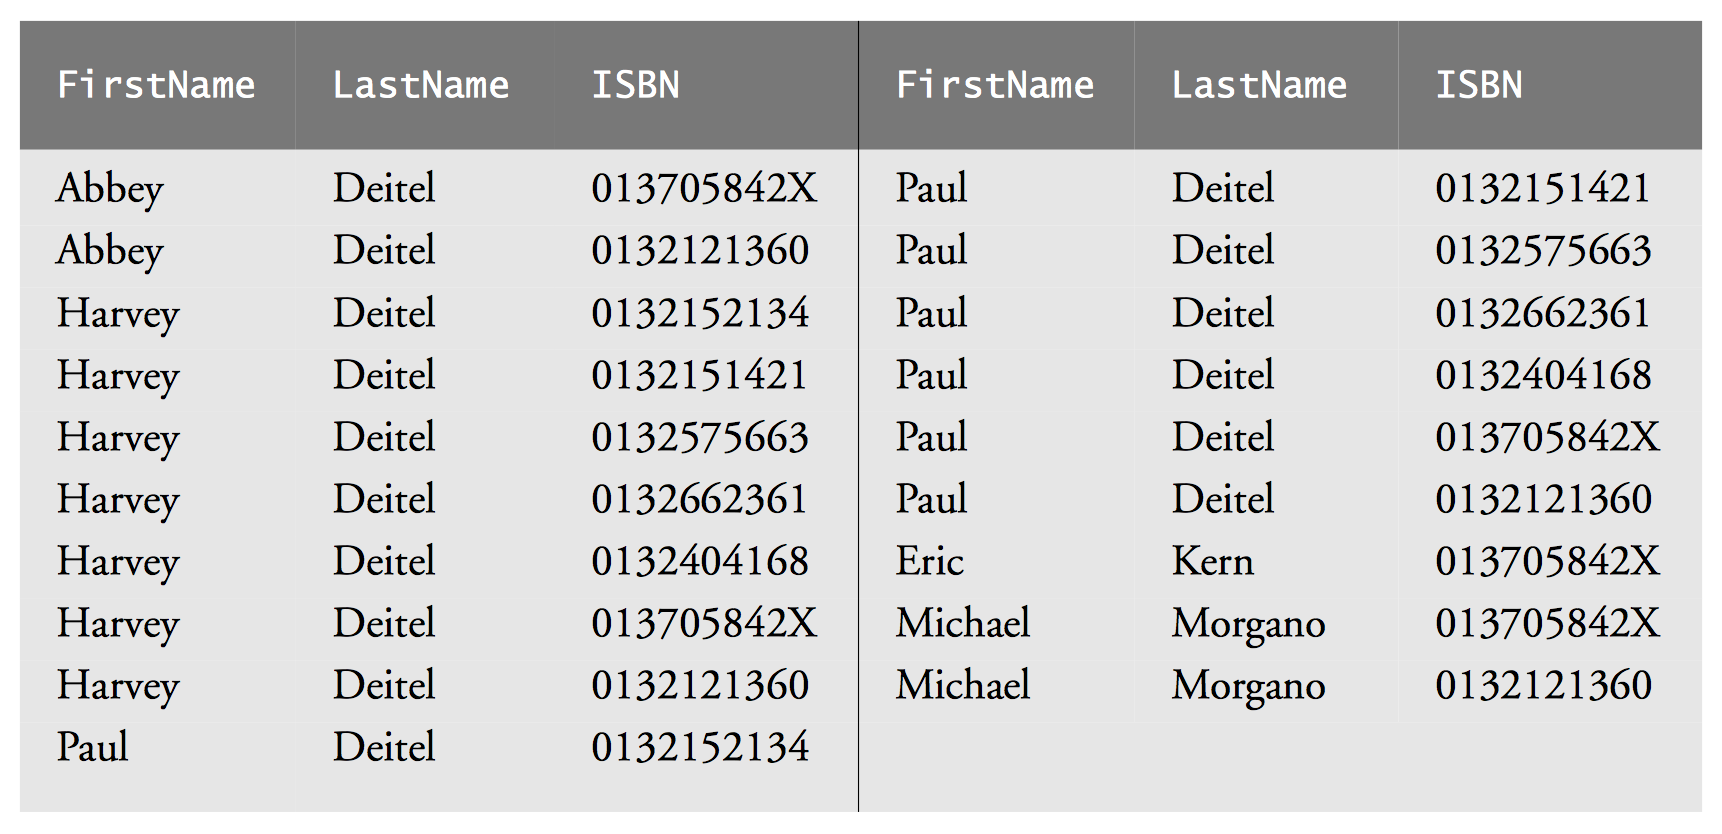 SQL qualified name query